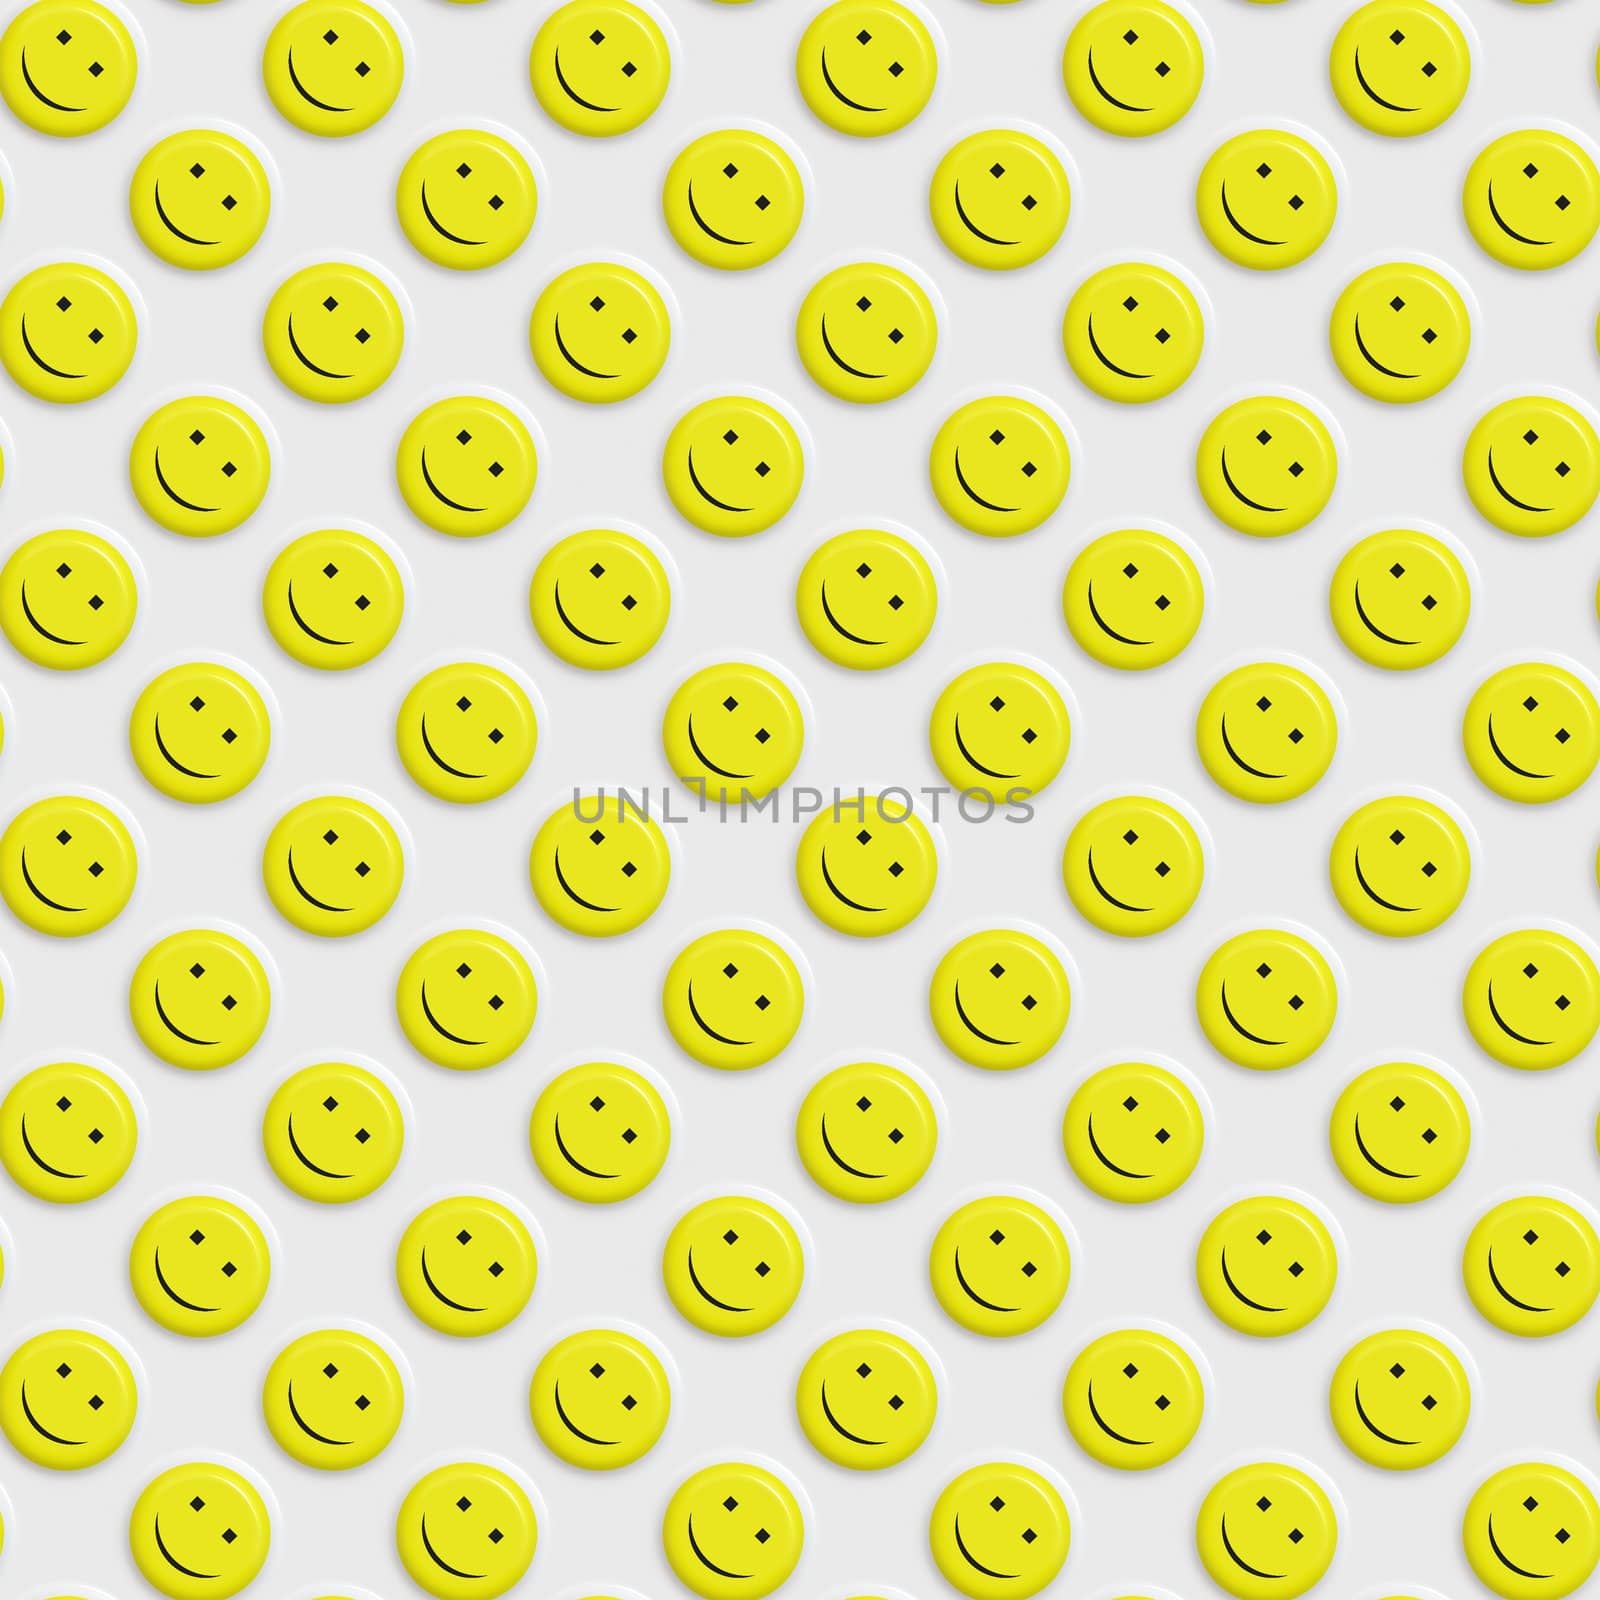 seamless texture of many 3d yellow smiley faces